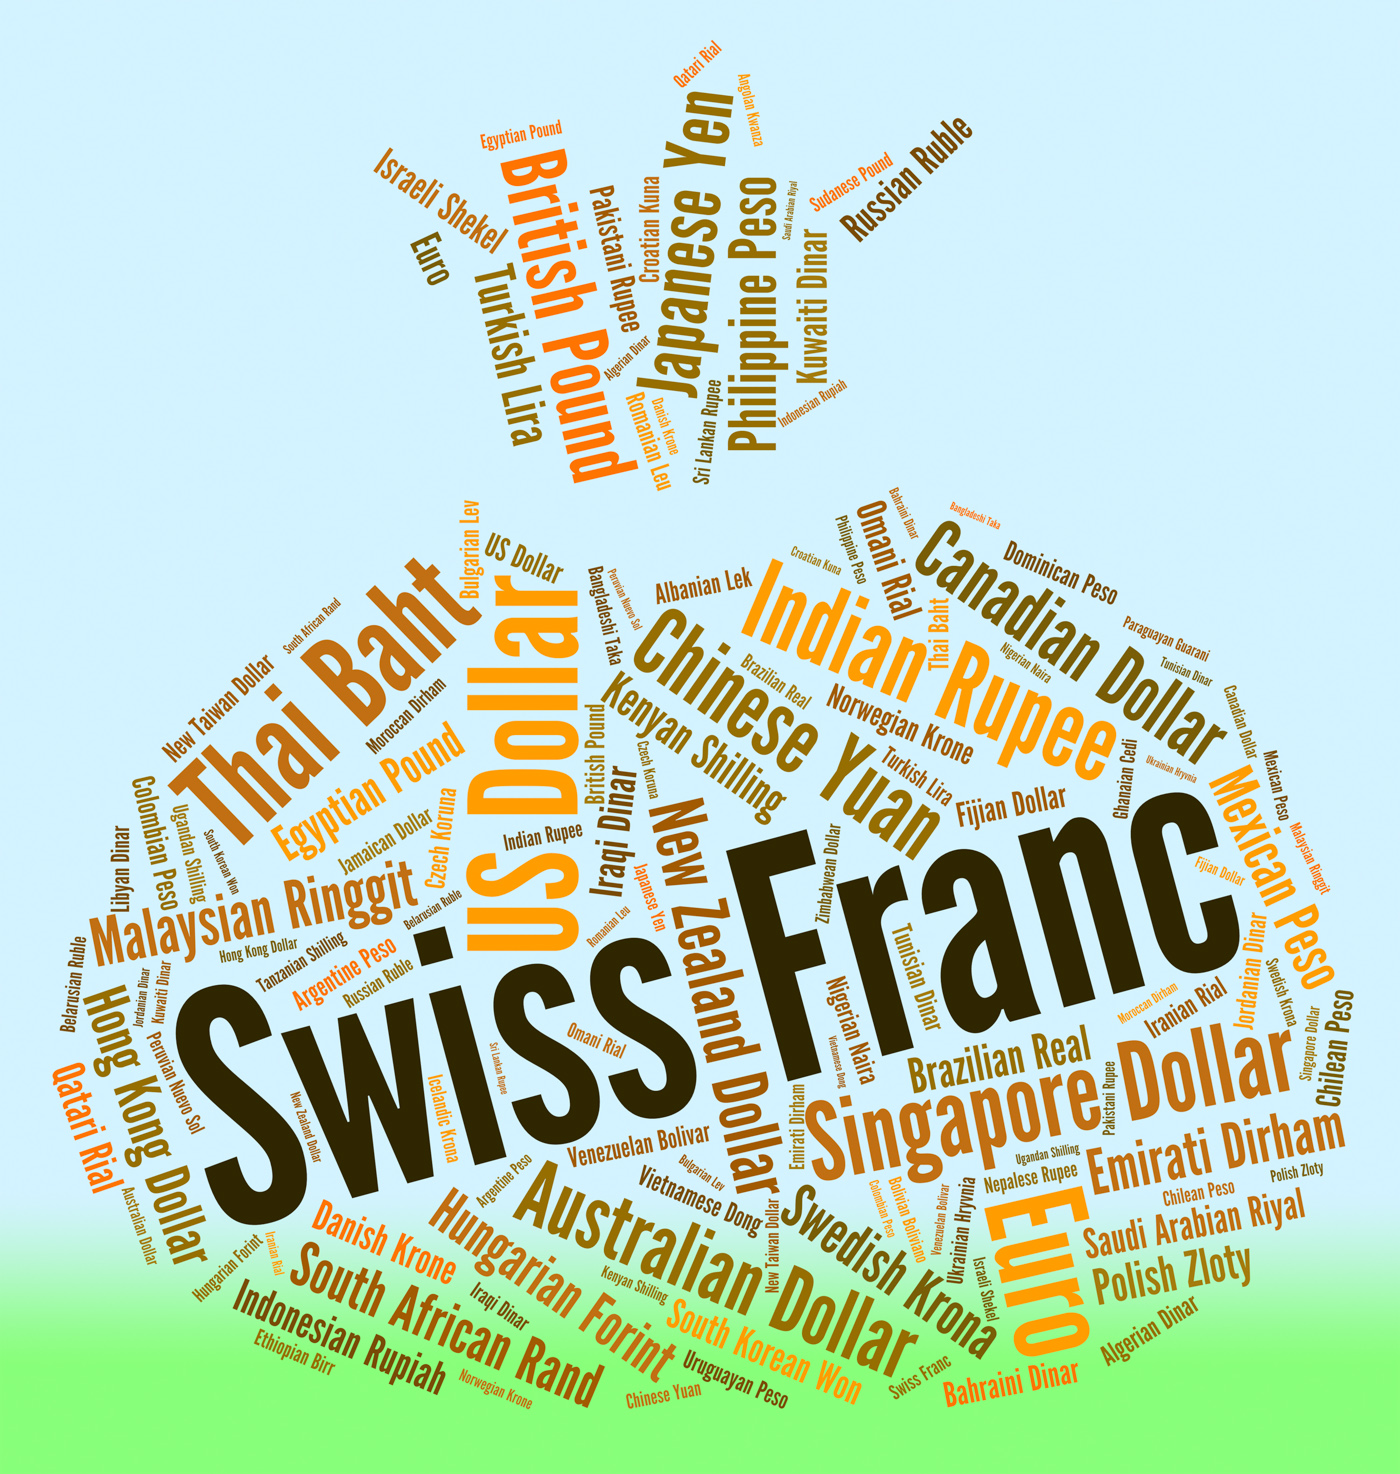 Swiss franc means foreign exchange and currencies photo